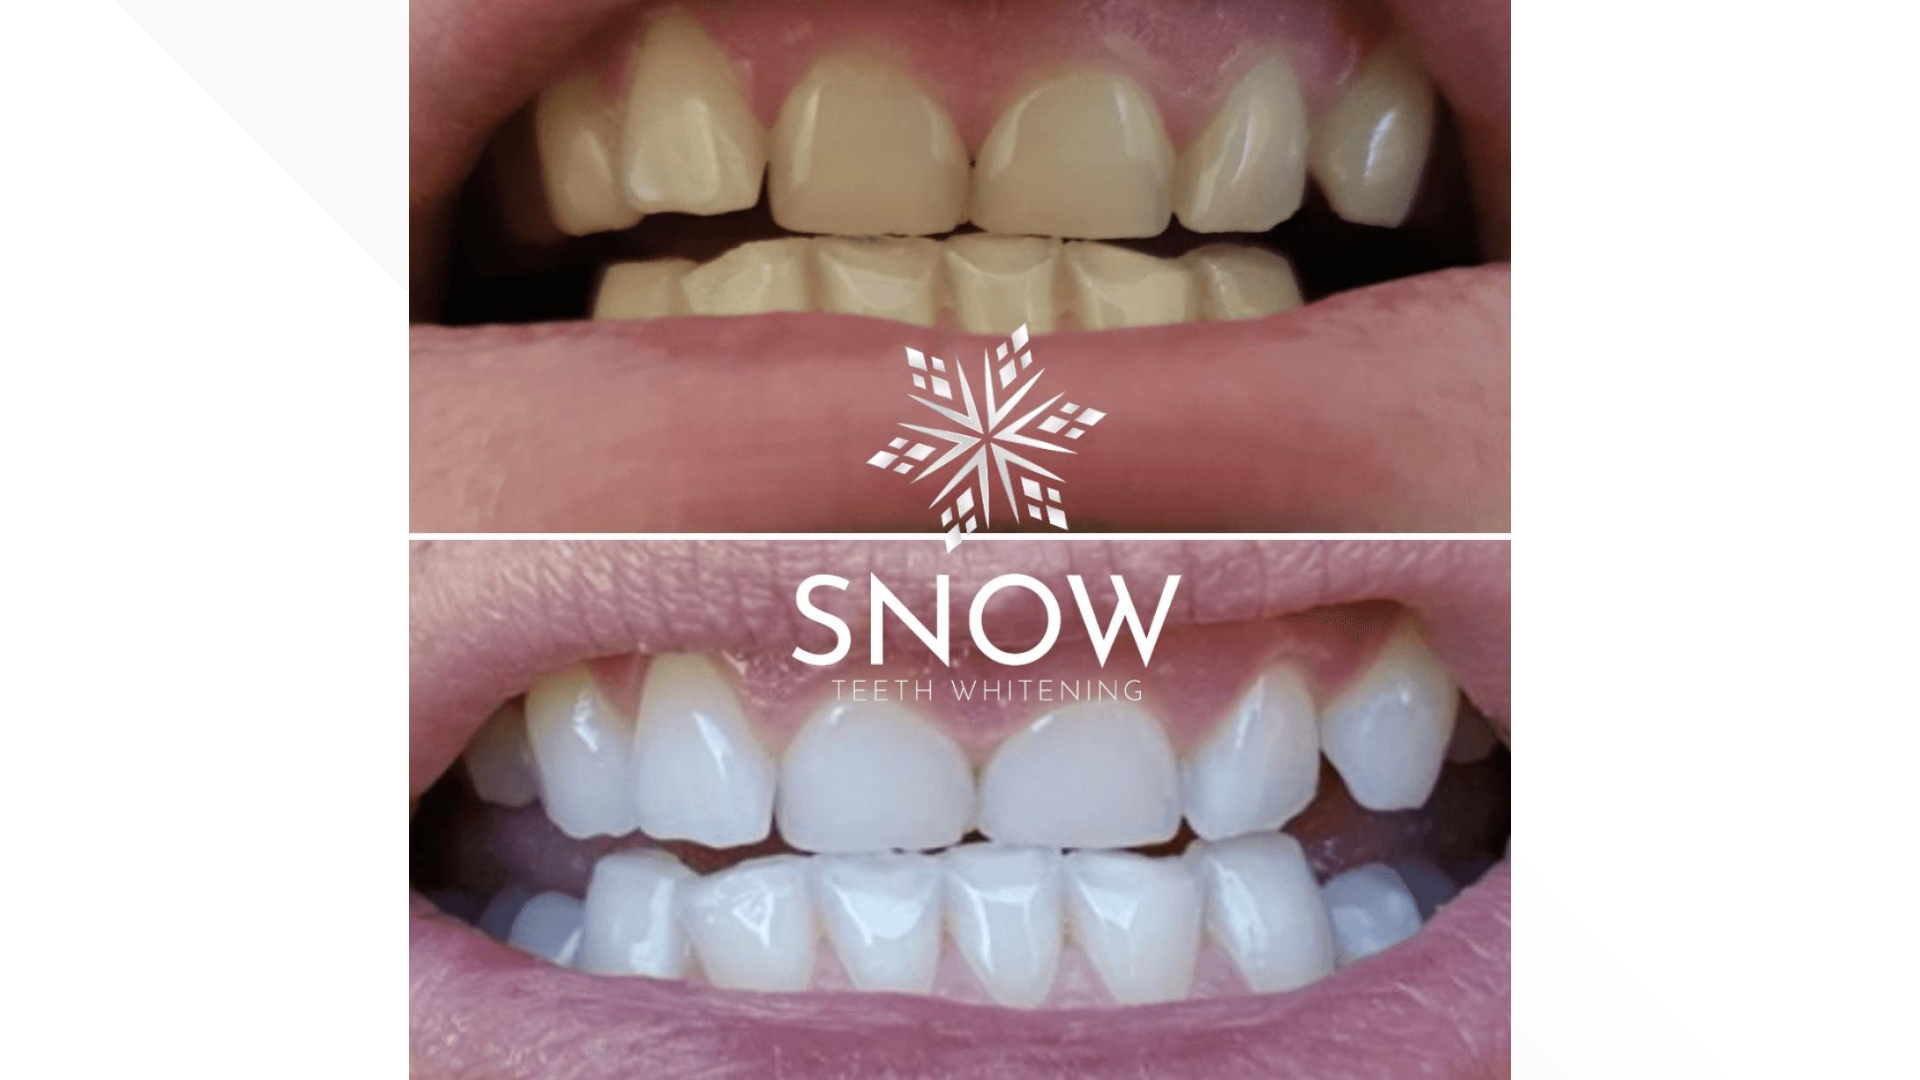 What Does Vs Snow Teeth Whitening Do?